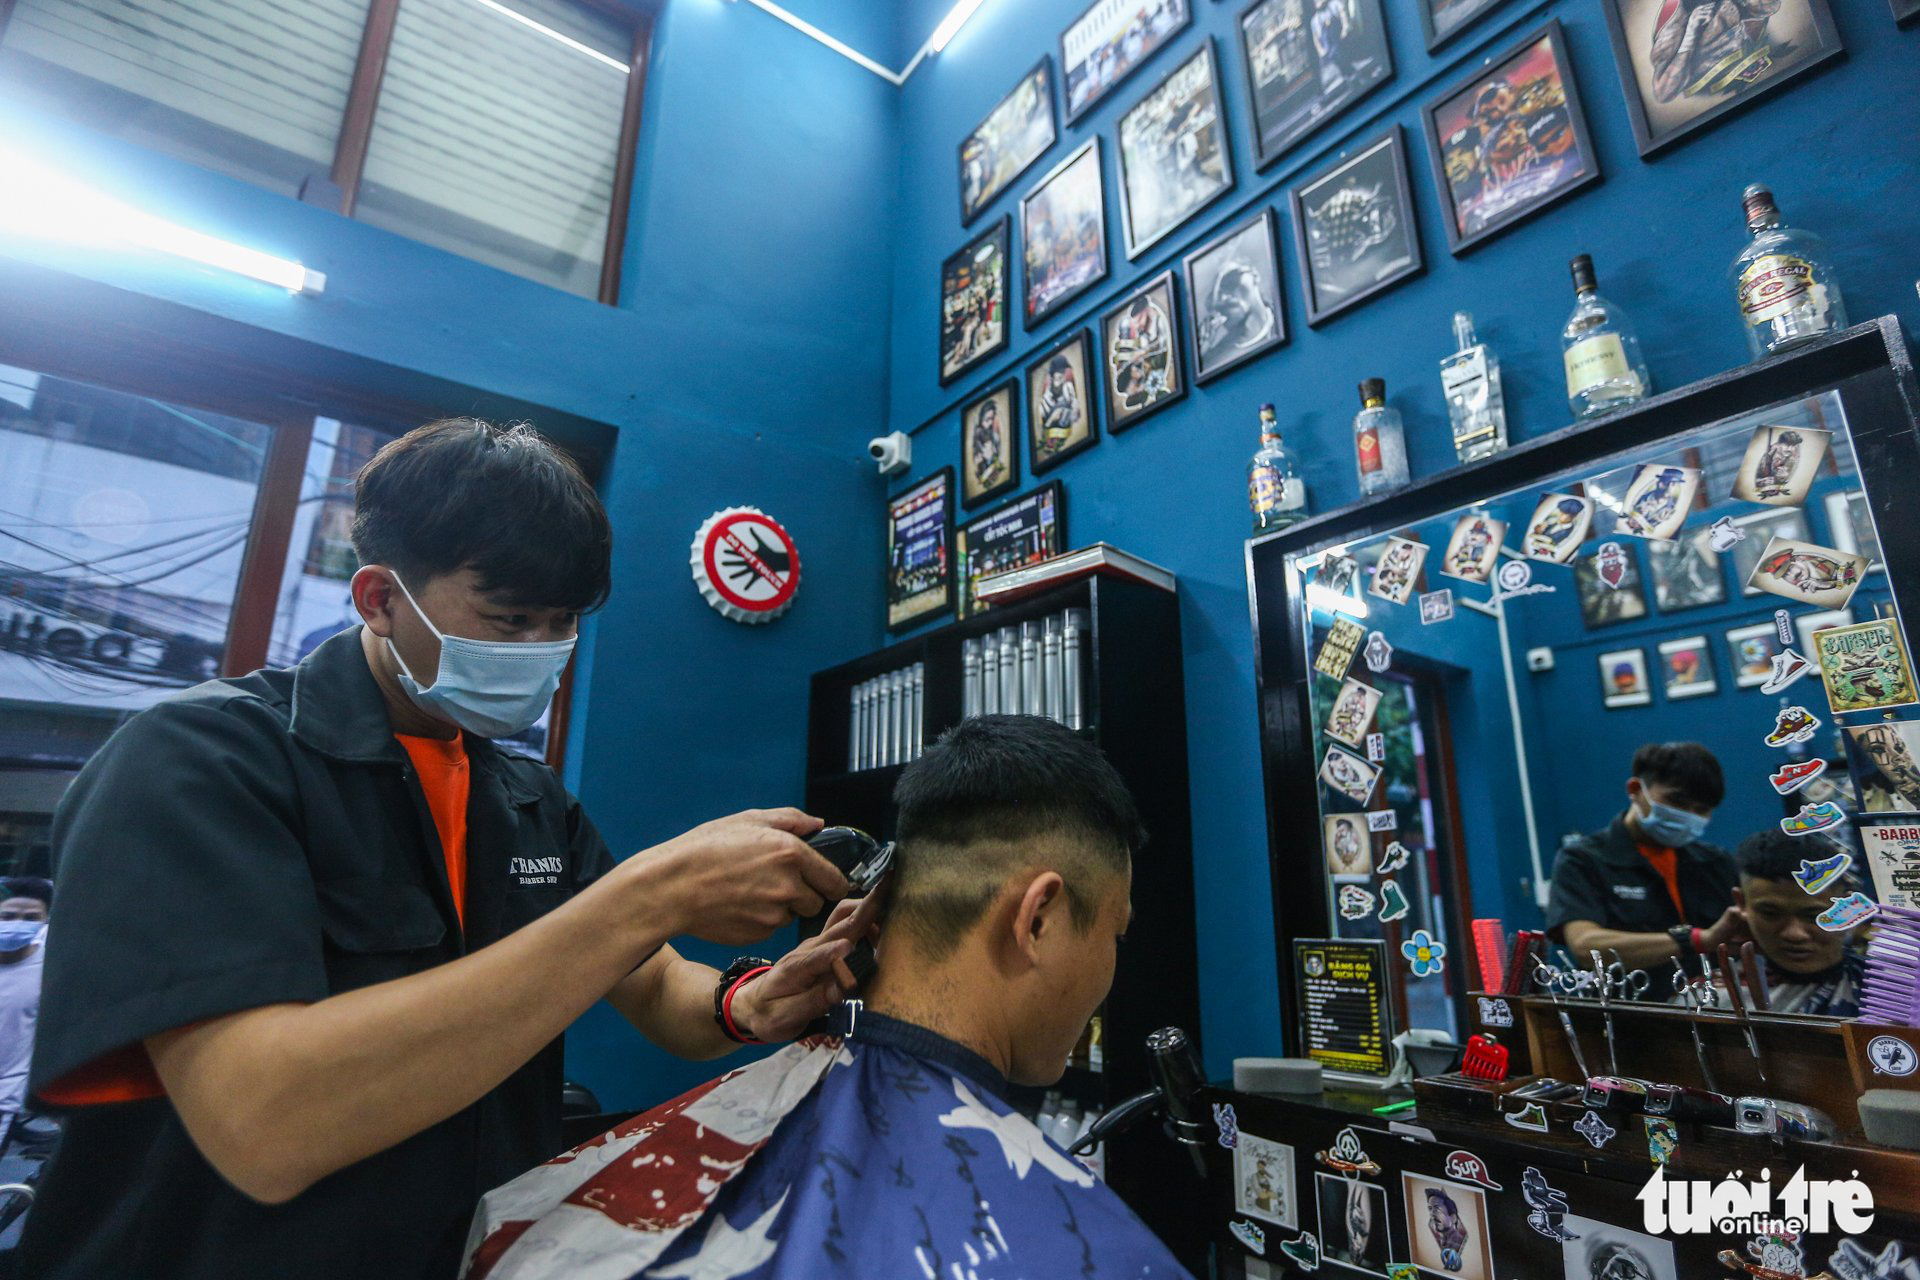 Giap Van Duy gives his customer a haircut at his barbershop in Thanh Xuan District, Hanoi, July 12, 2021. Photo: Ha Quan / Tuoi Tre